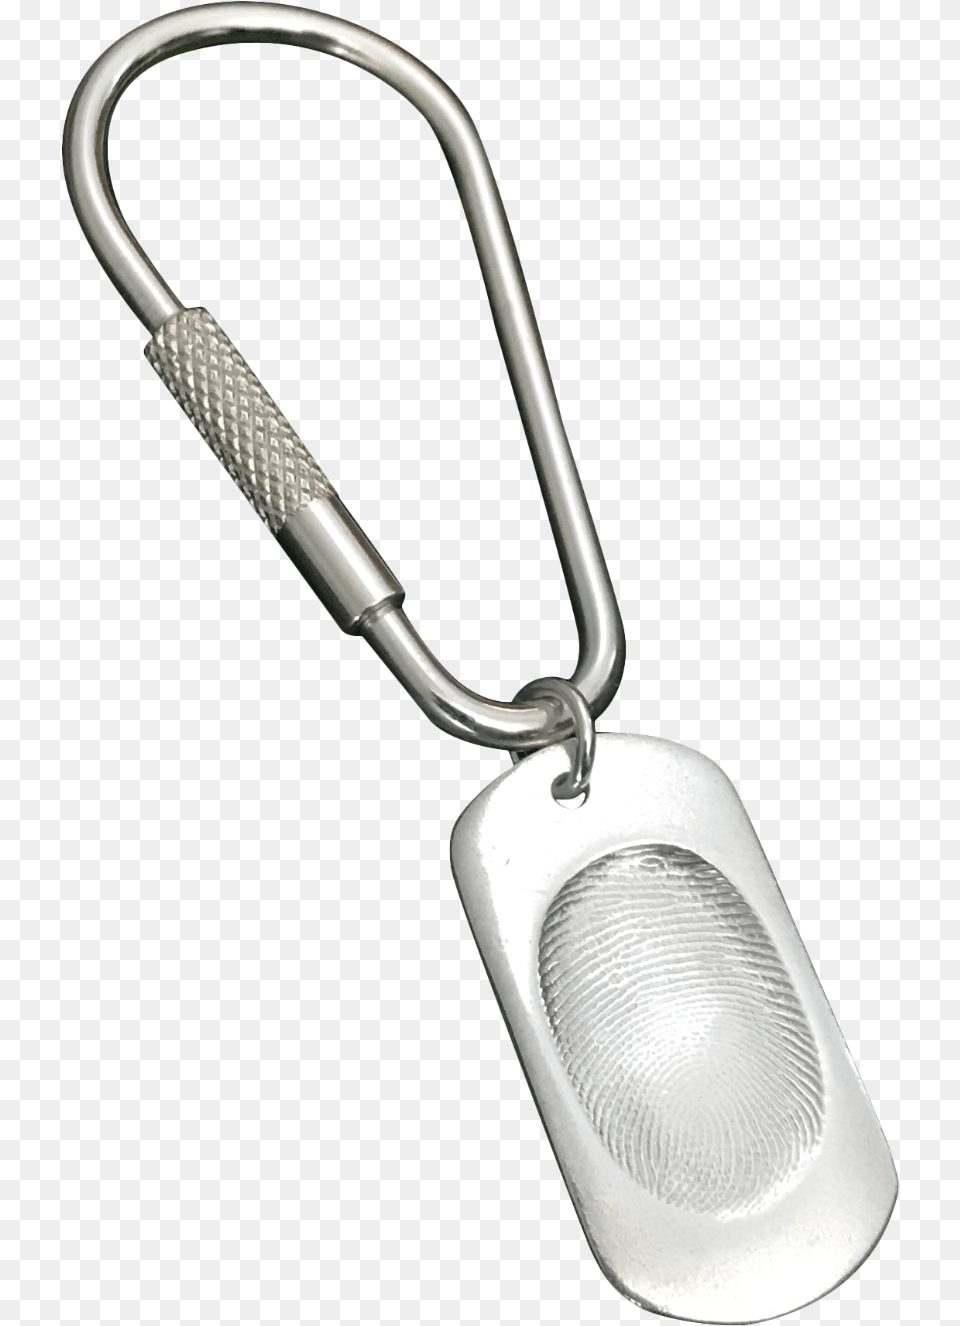 Silver, Electrical Device, Microphone, Smoke Pipe, Electronics Png Image